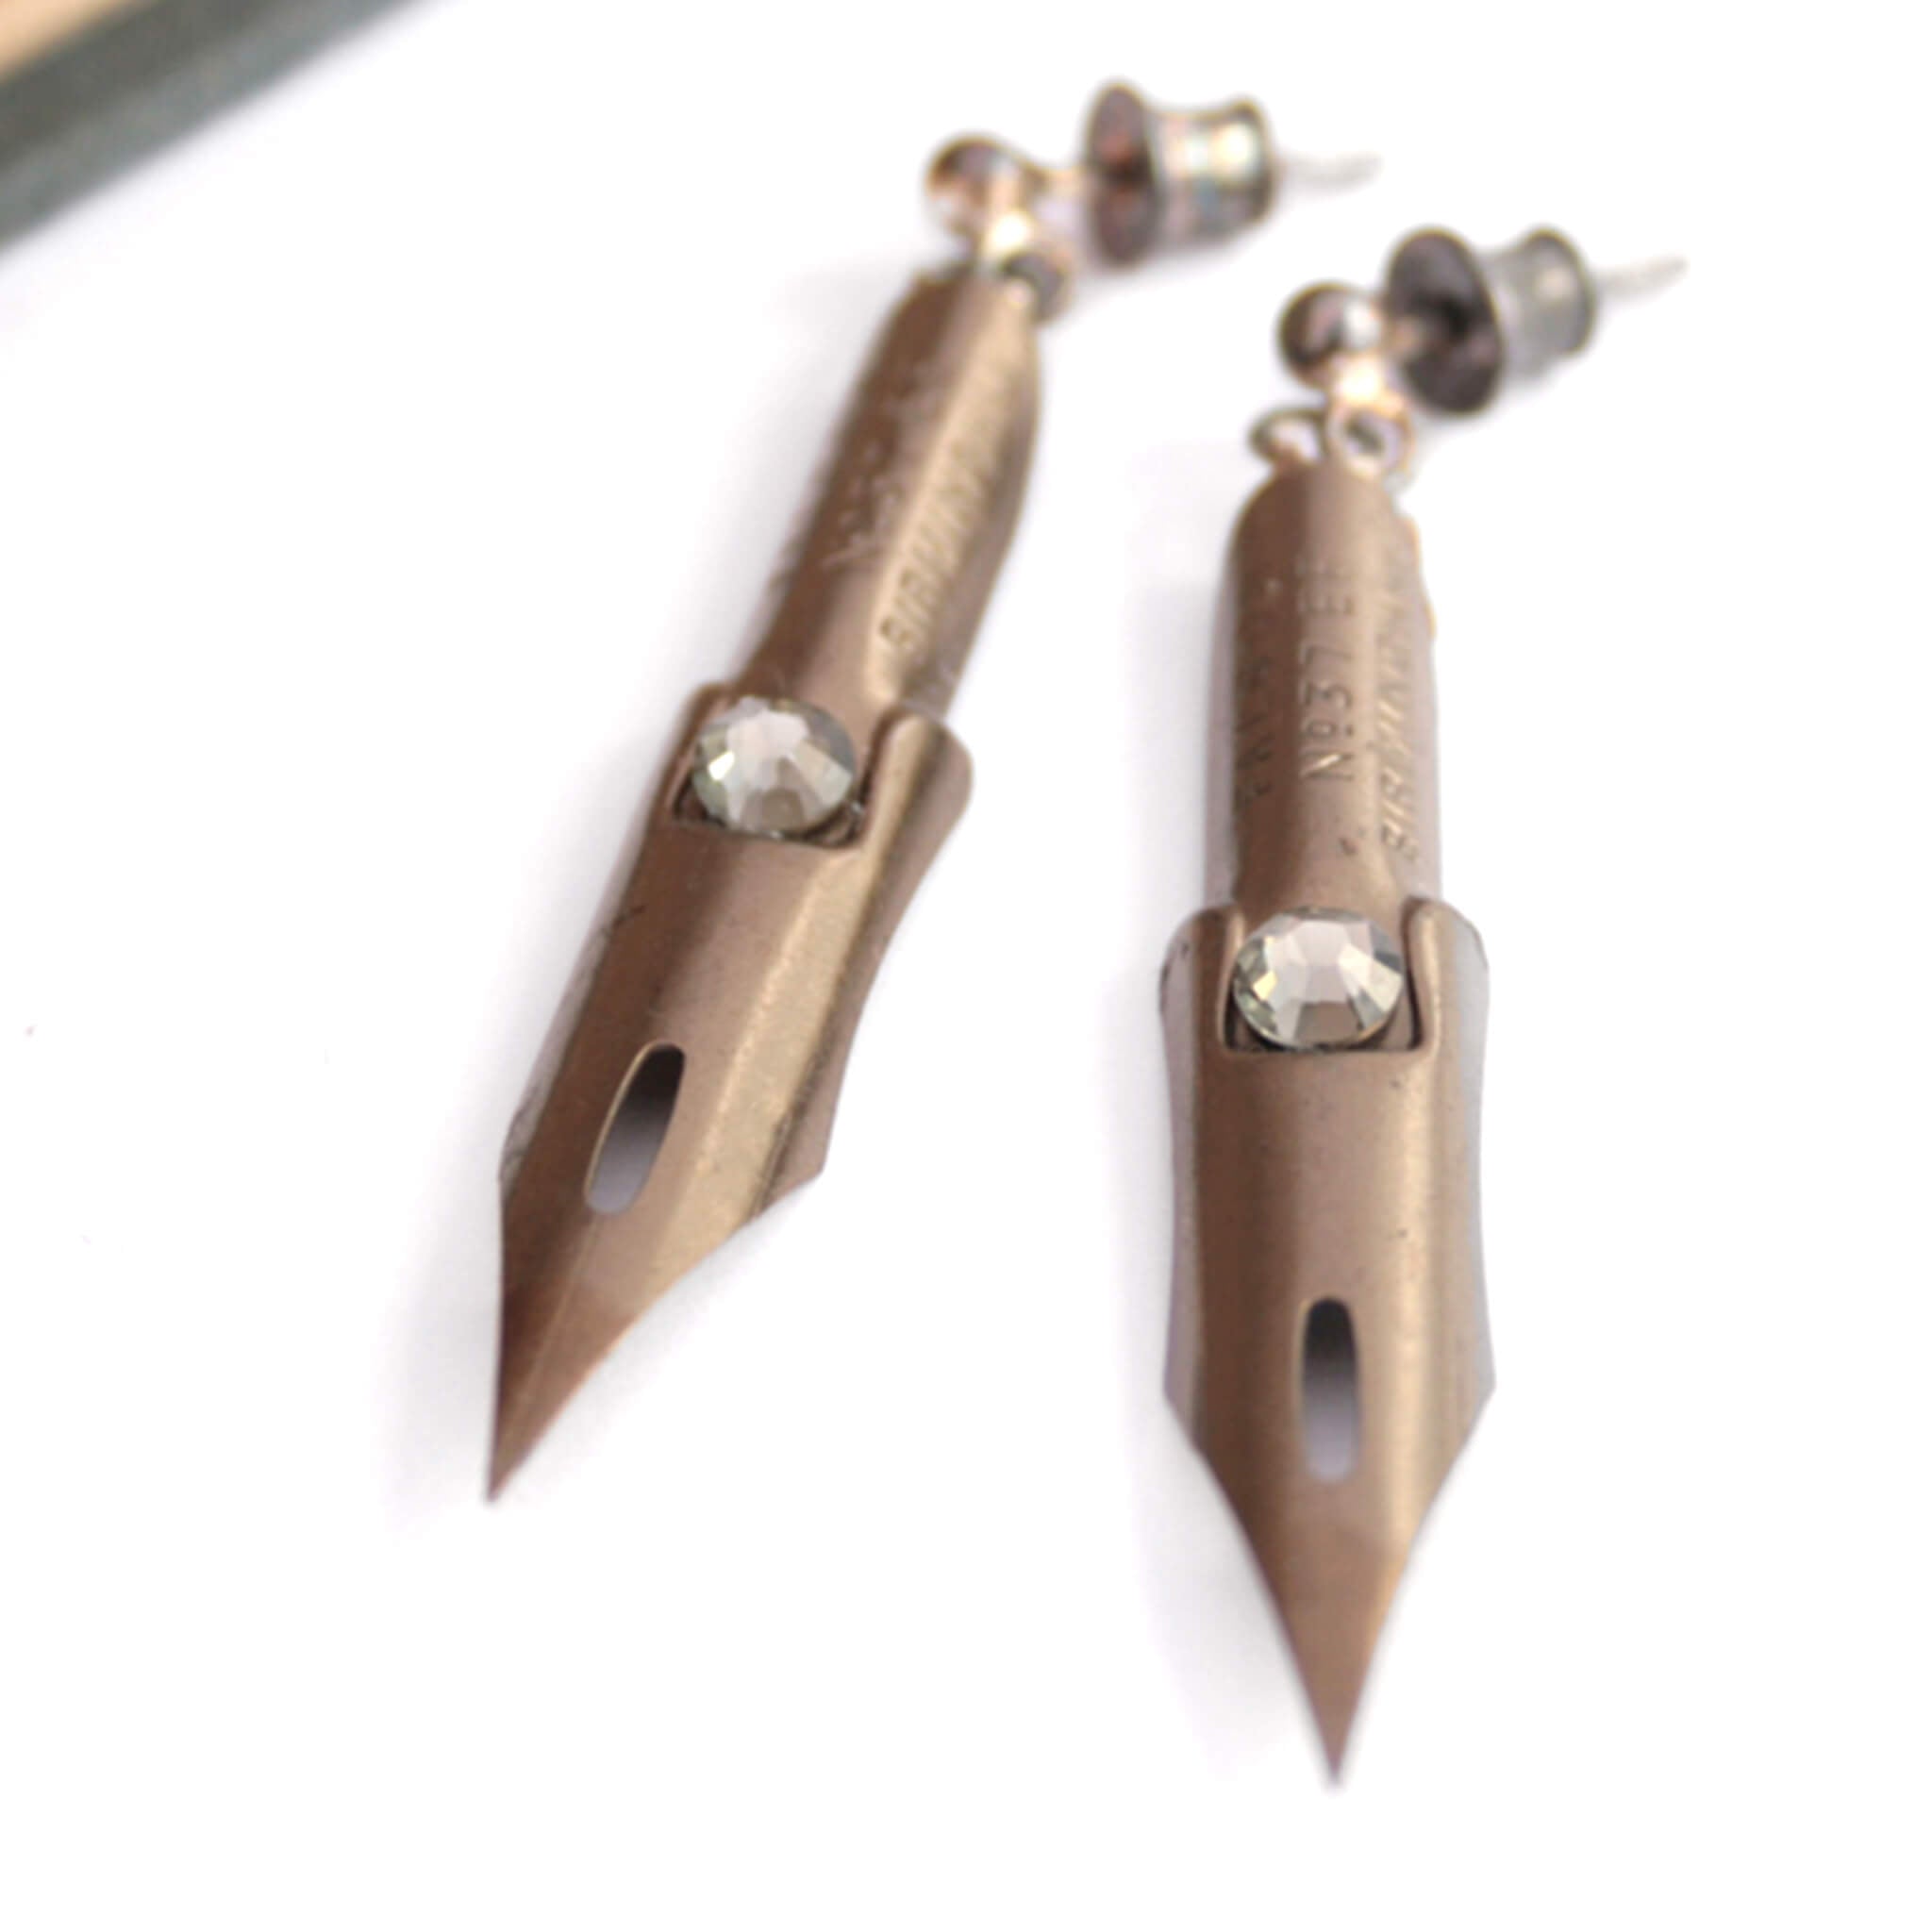 dark academia earrings made of pen nibs in bronze colour lying on a piece of white paper